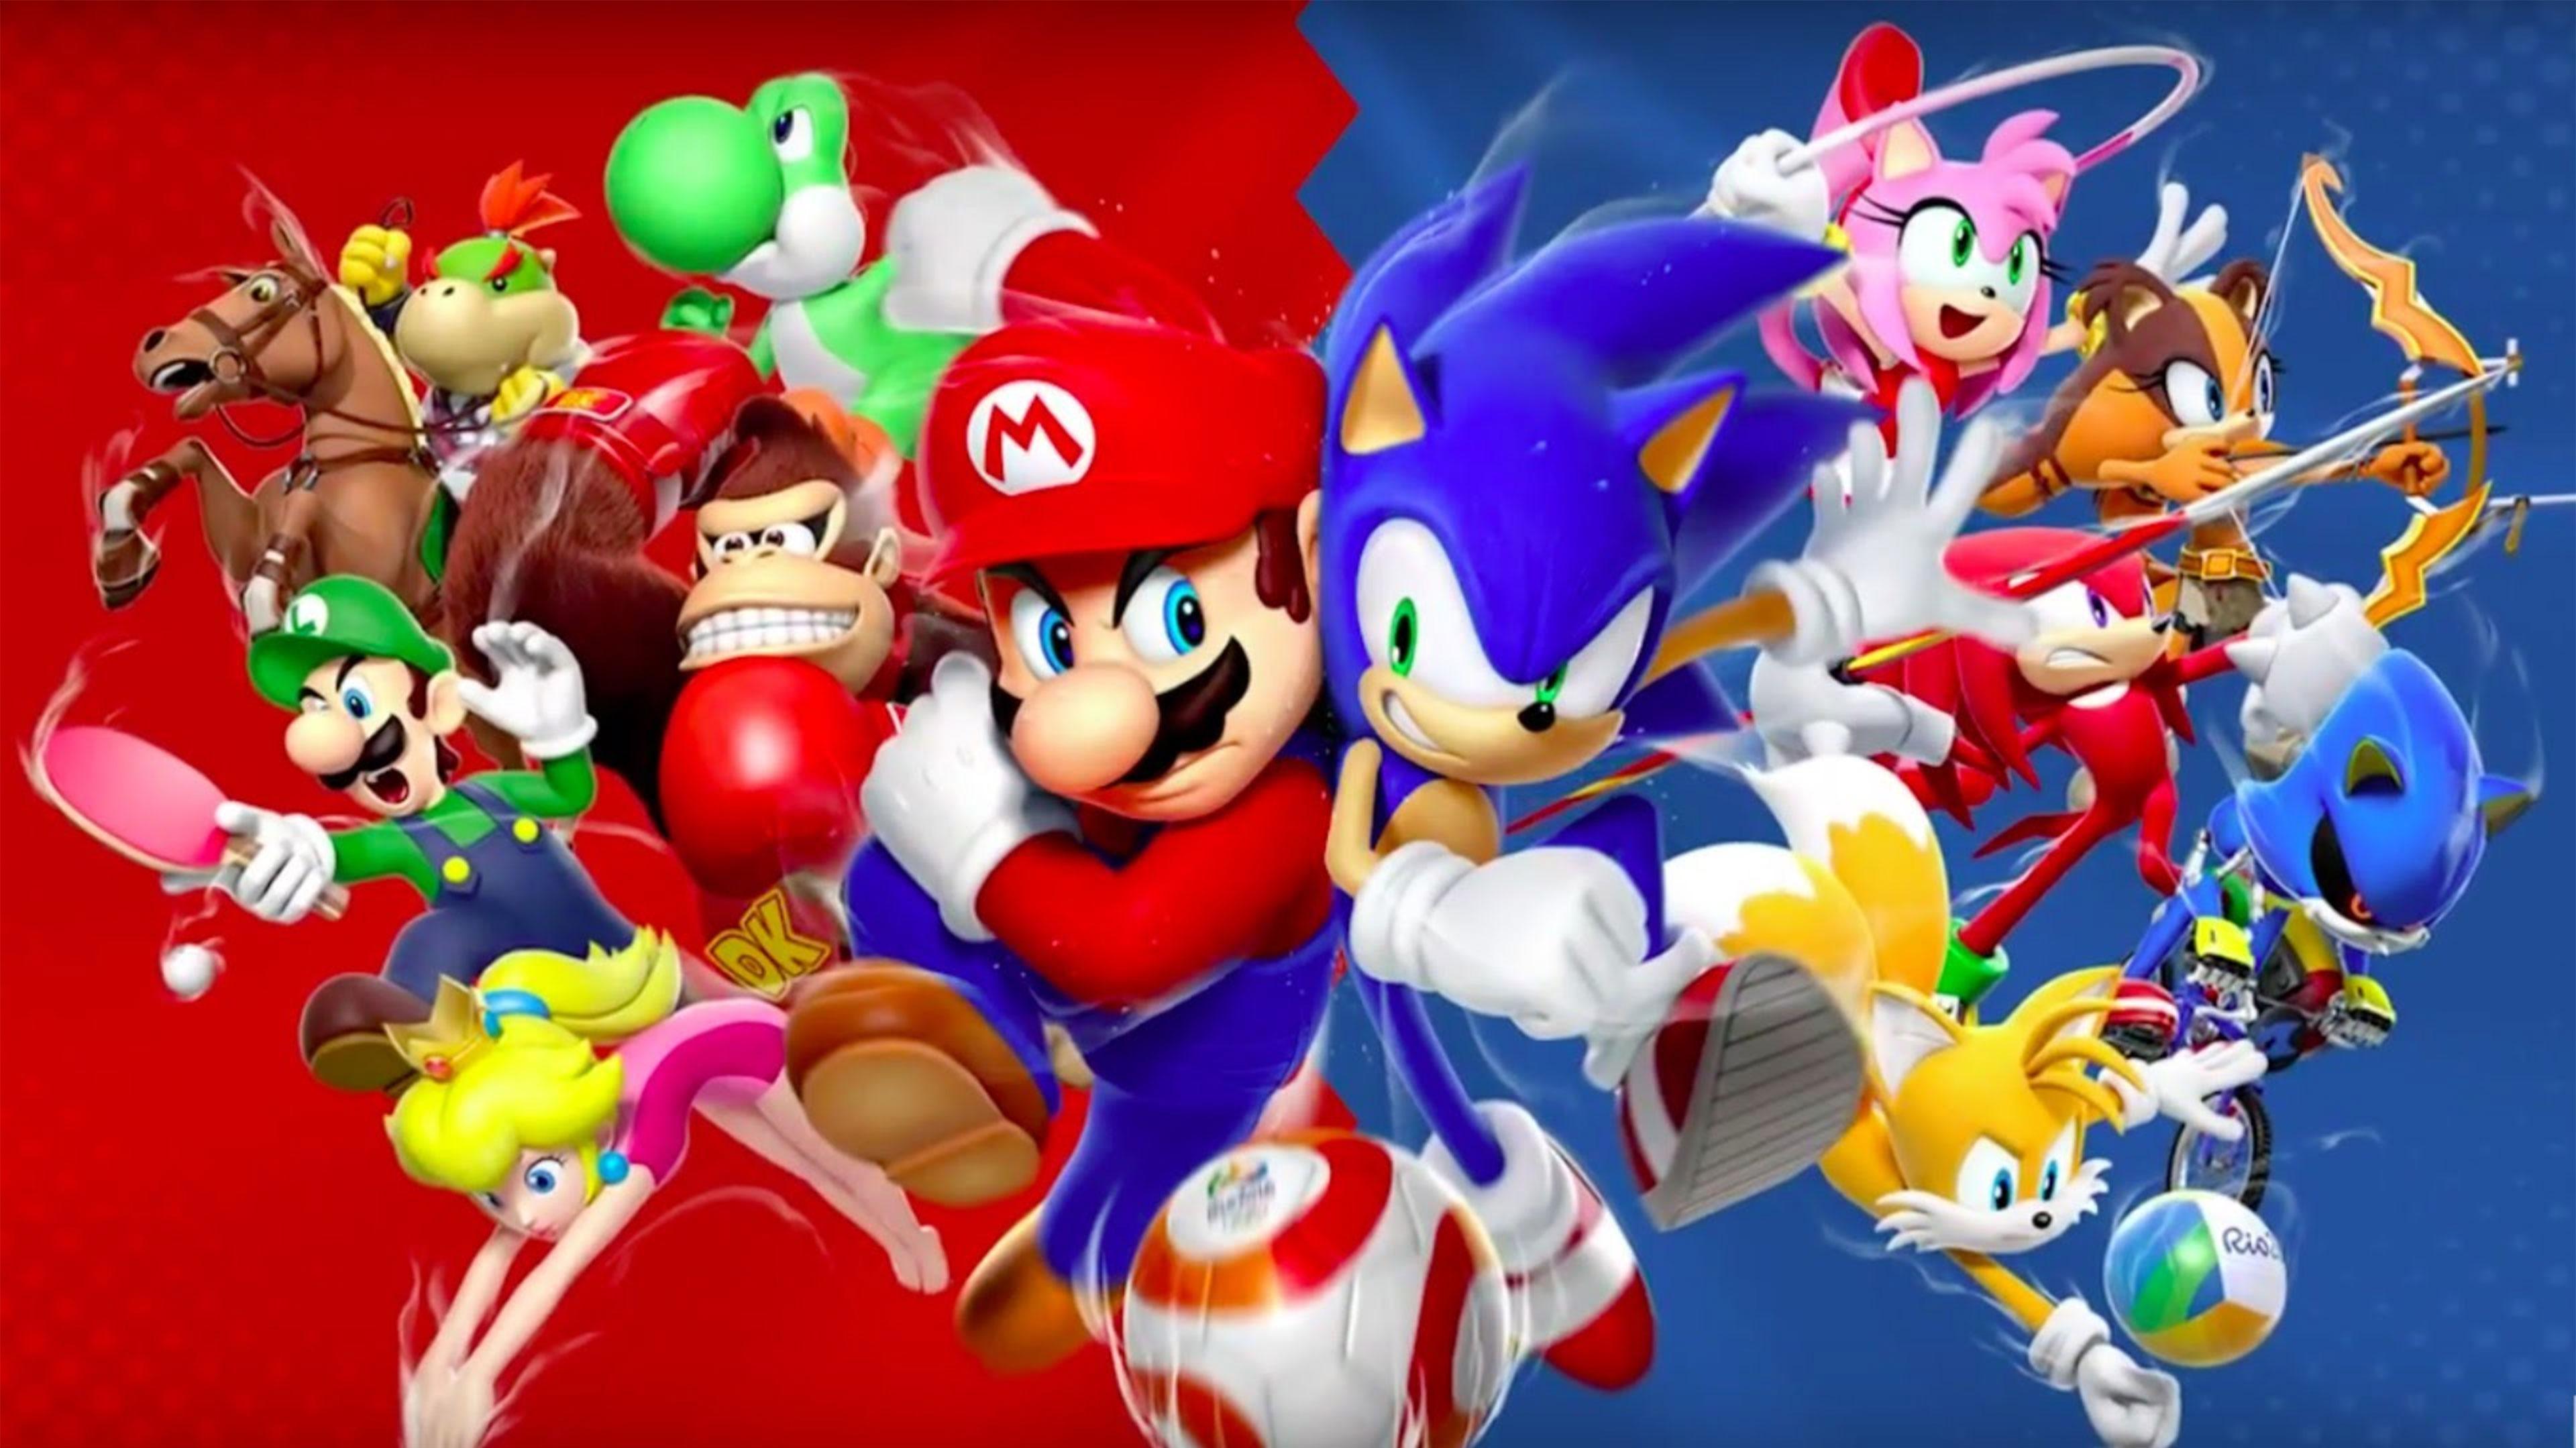 Mario and Sonic at the Rio 2016 Olympic Games Wallpapers in Ultra